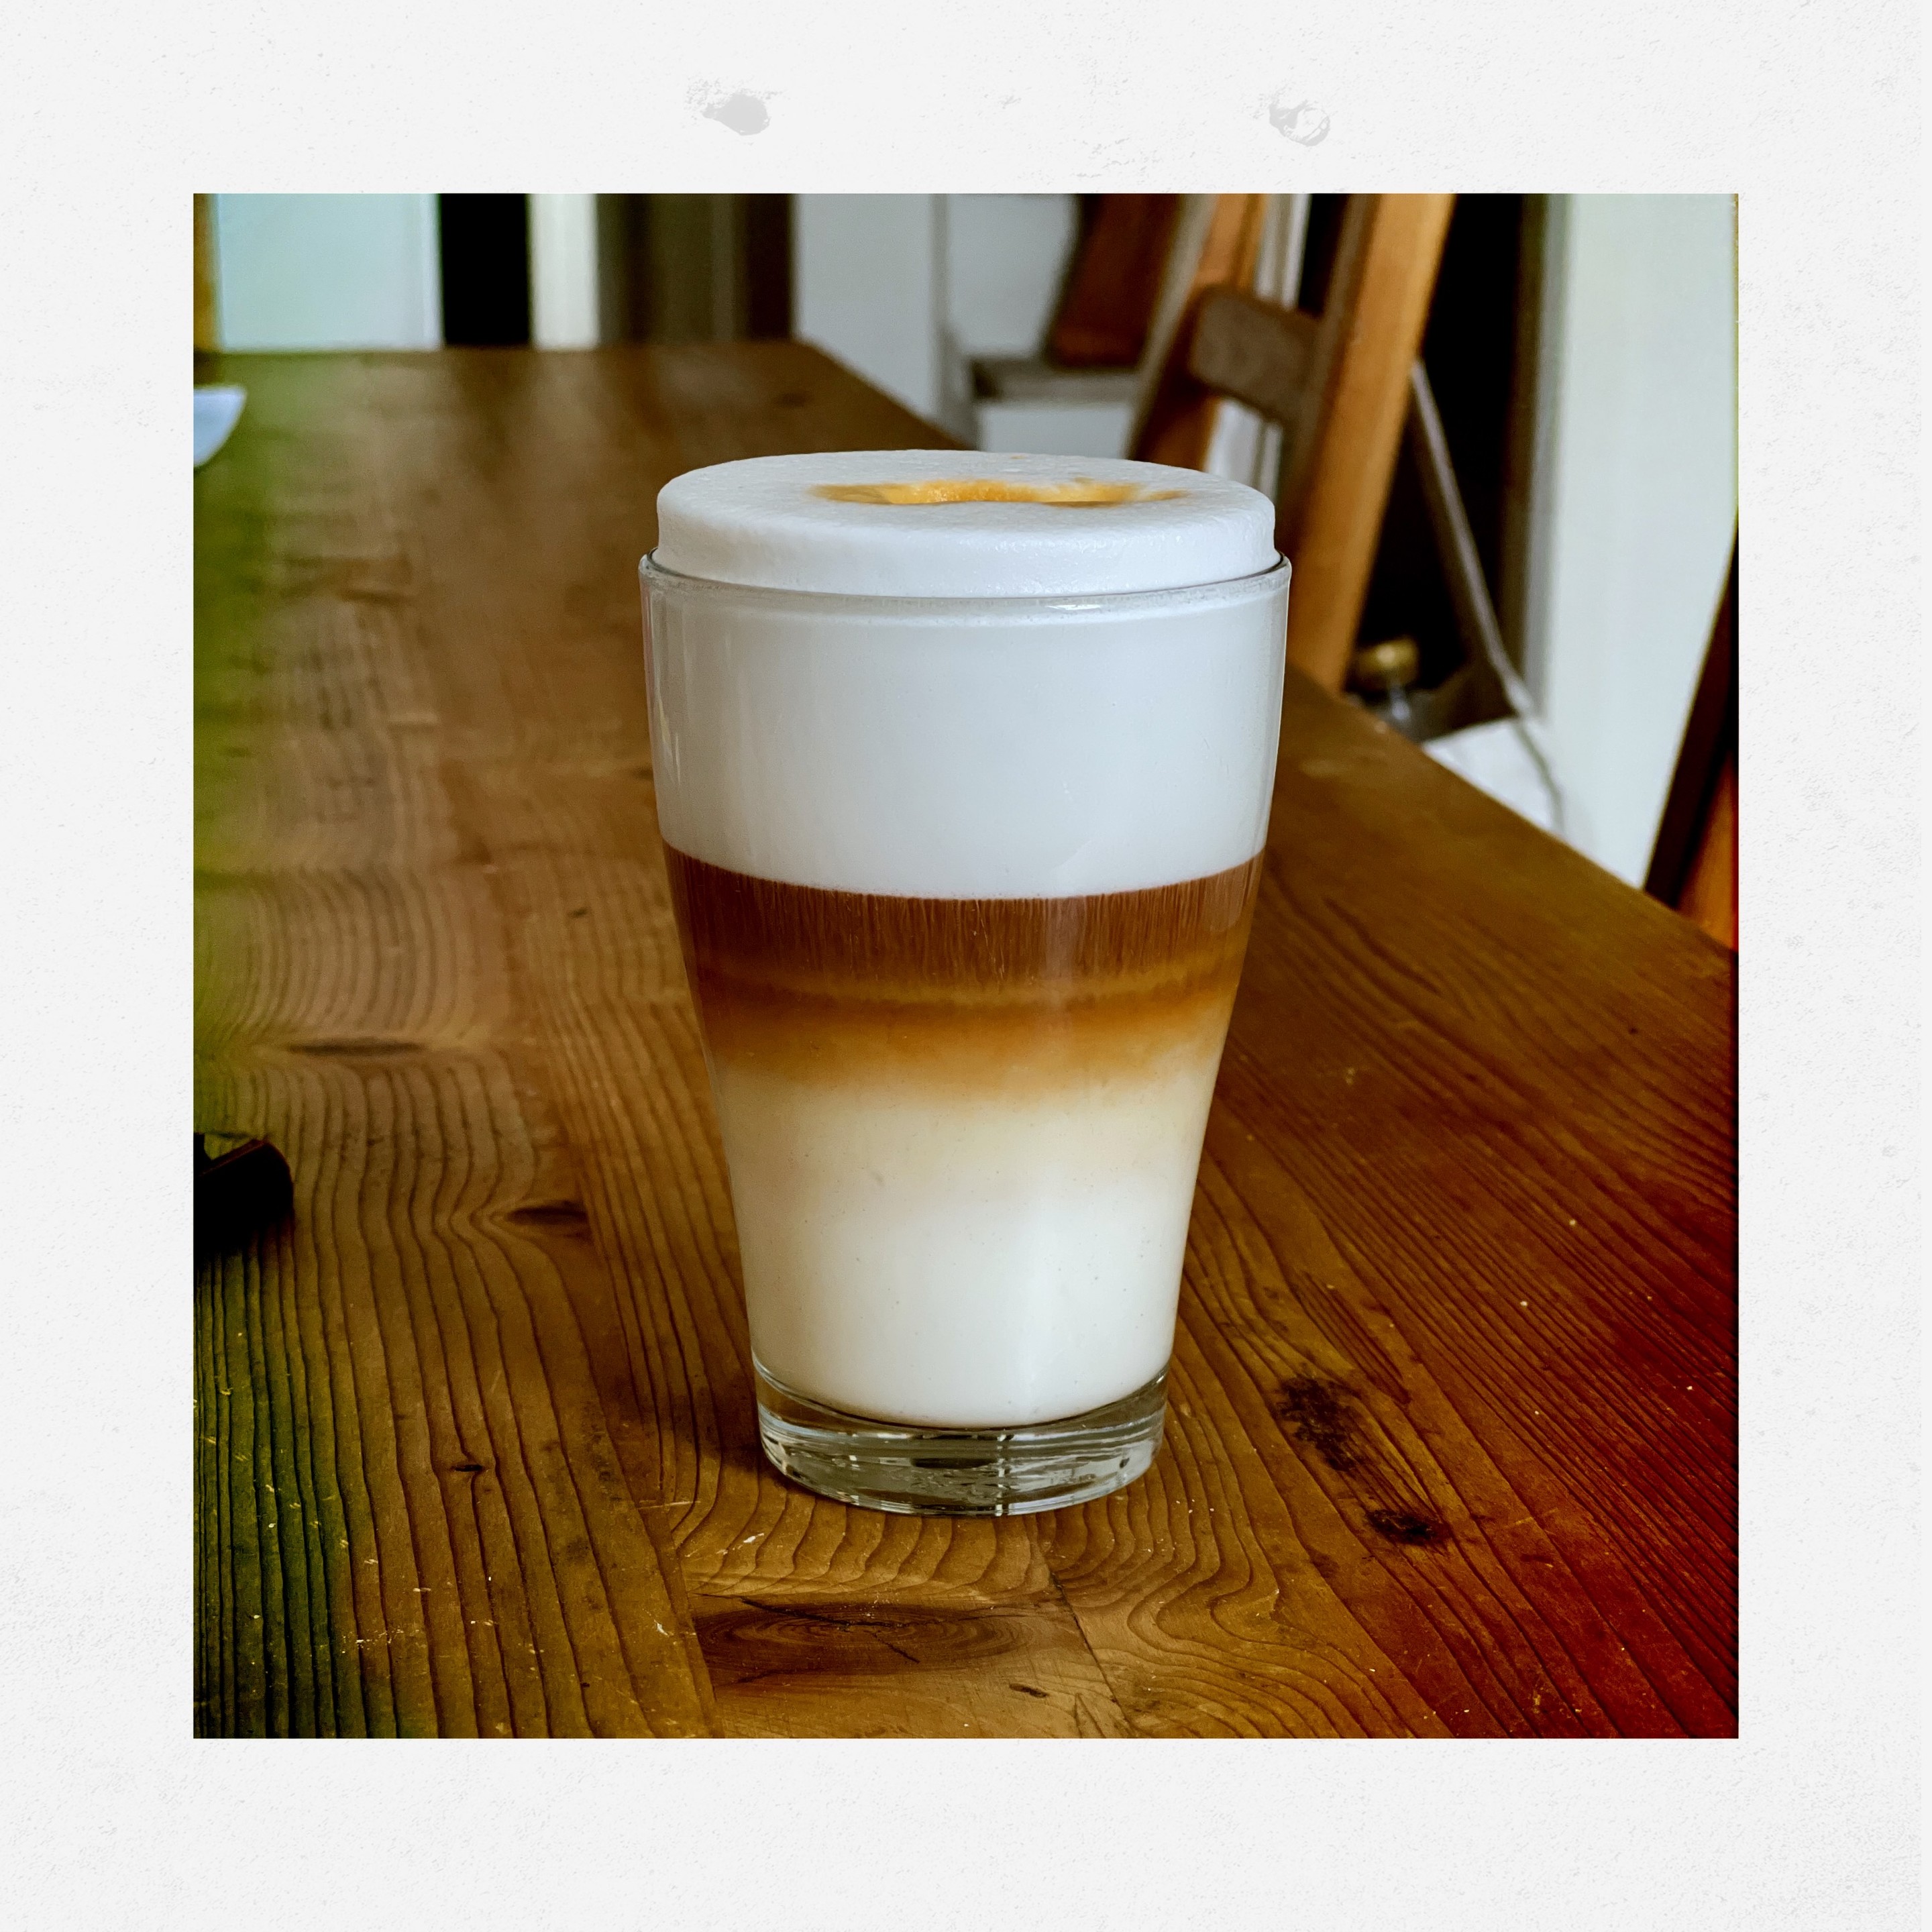 Polaroid style pictures of a glass of foamed milk with a brown/red liquid floating in the middle of the glass. The glass stands on a wooden table. 